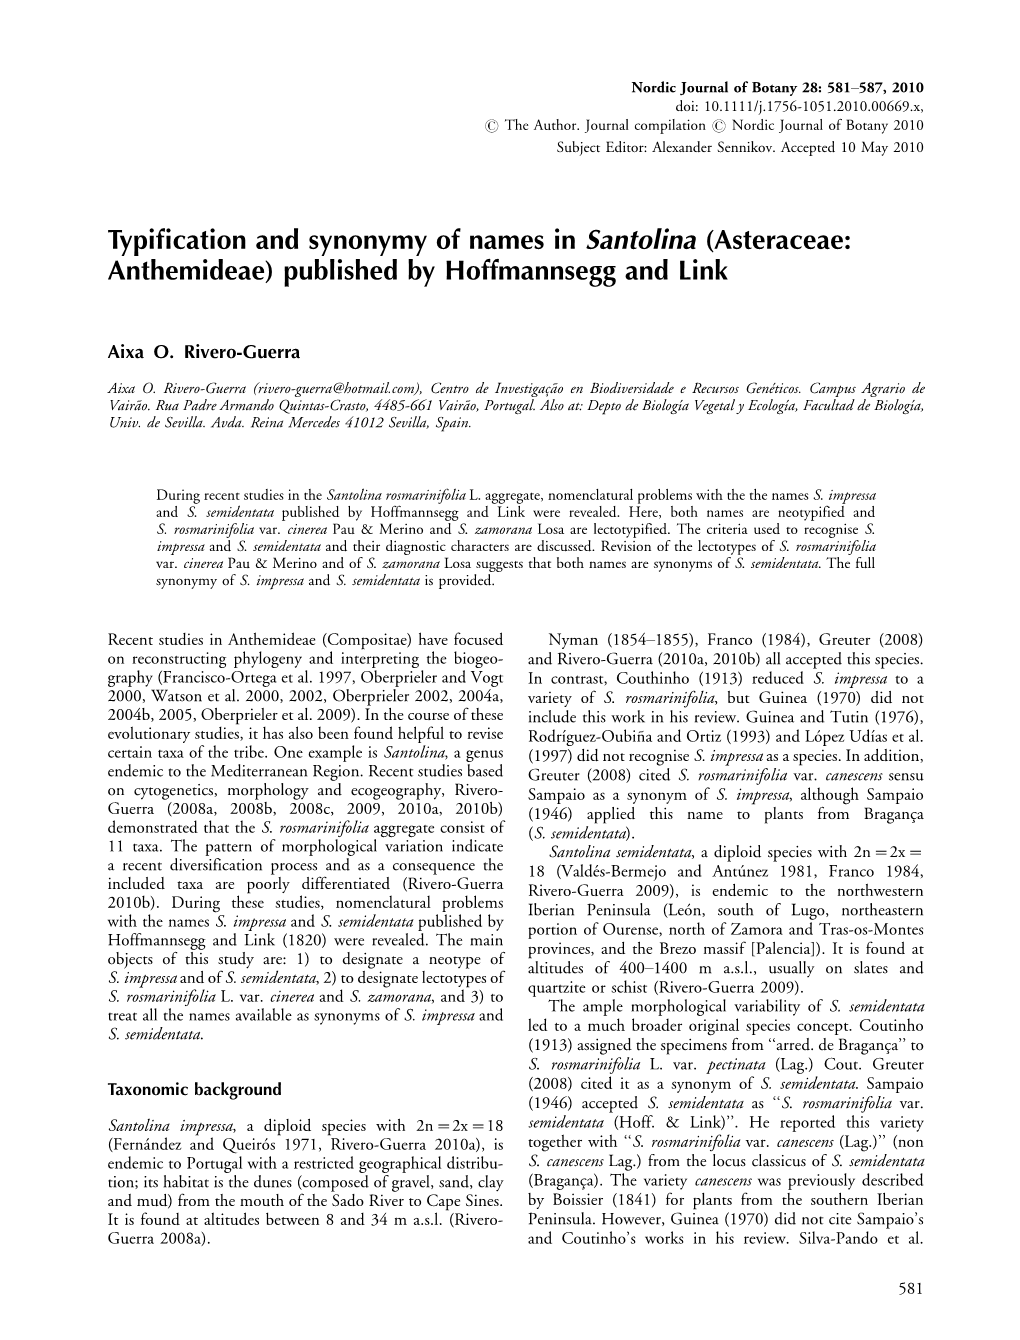 Typification and Synonymy of Names in Santolina (Asteraceae: Anthemideae) Published by Hoffmannsegg and Link